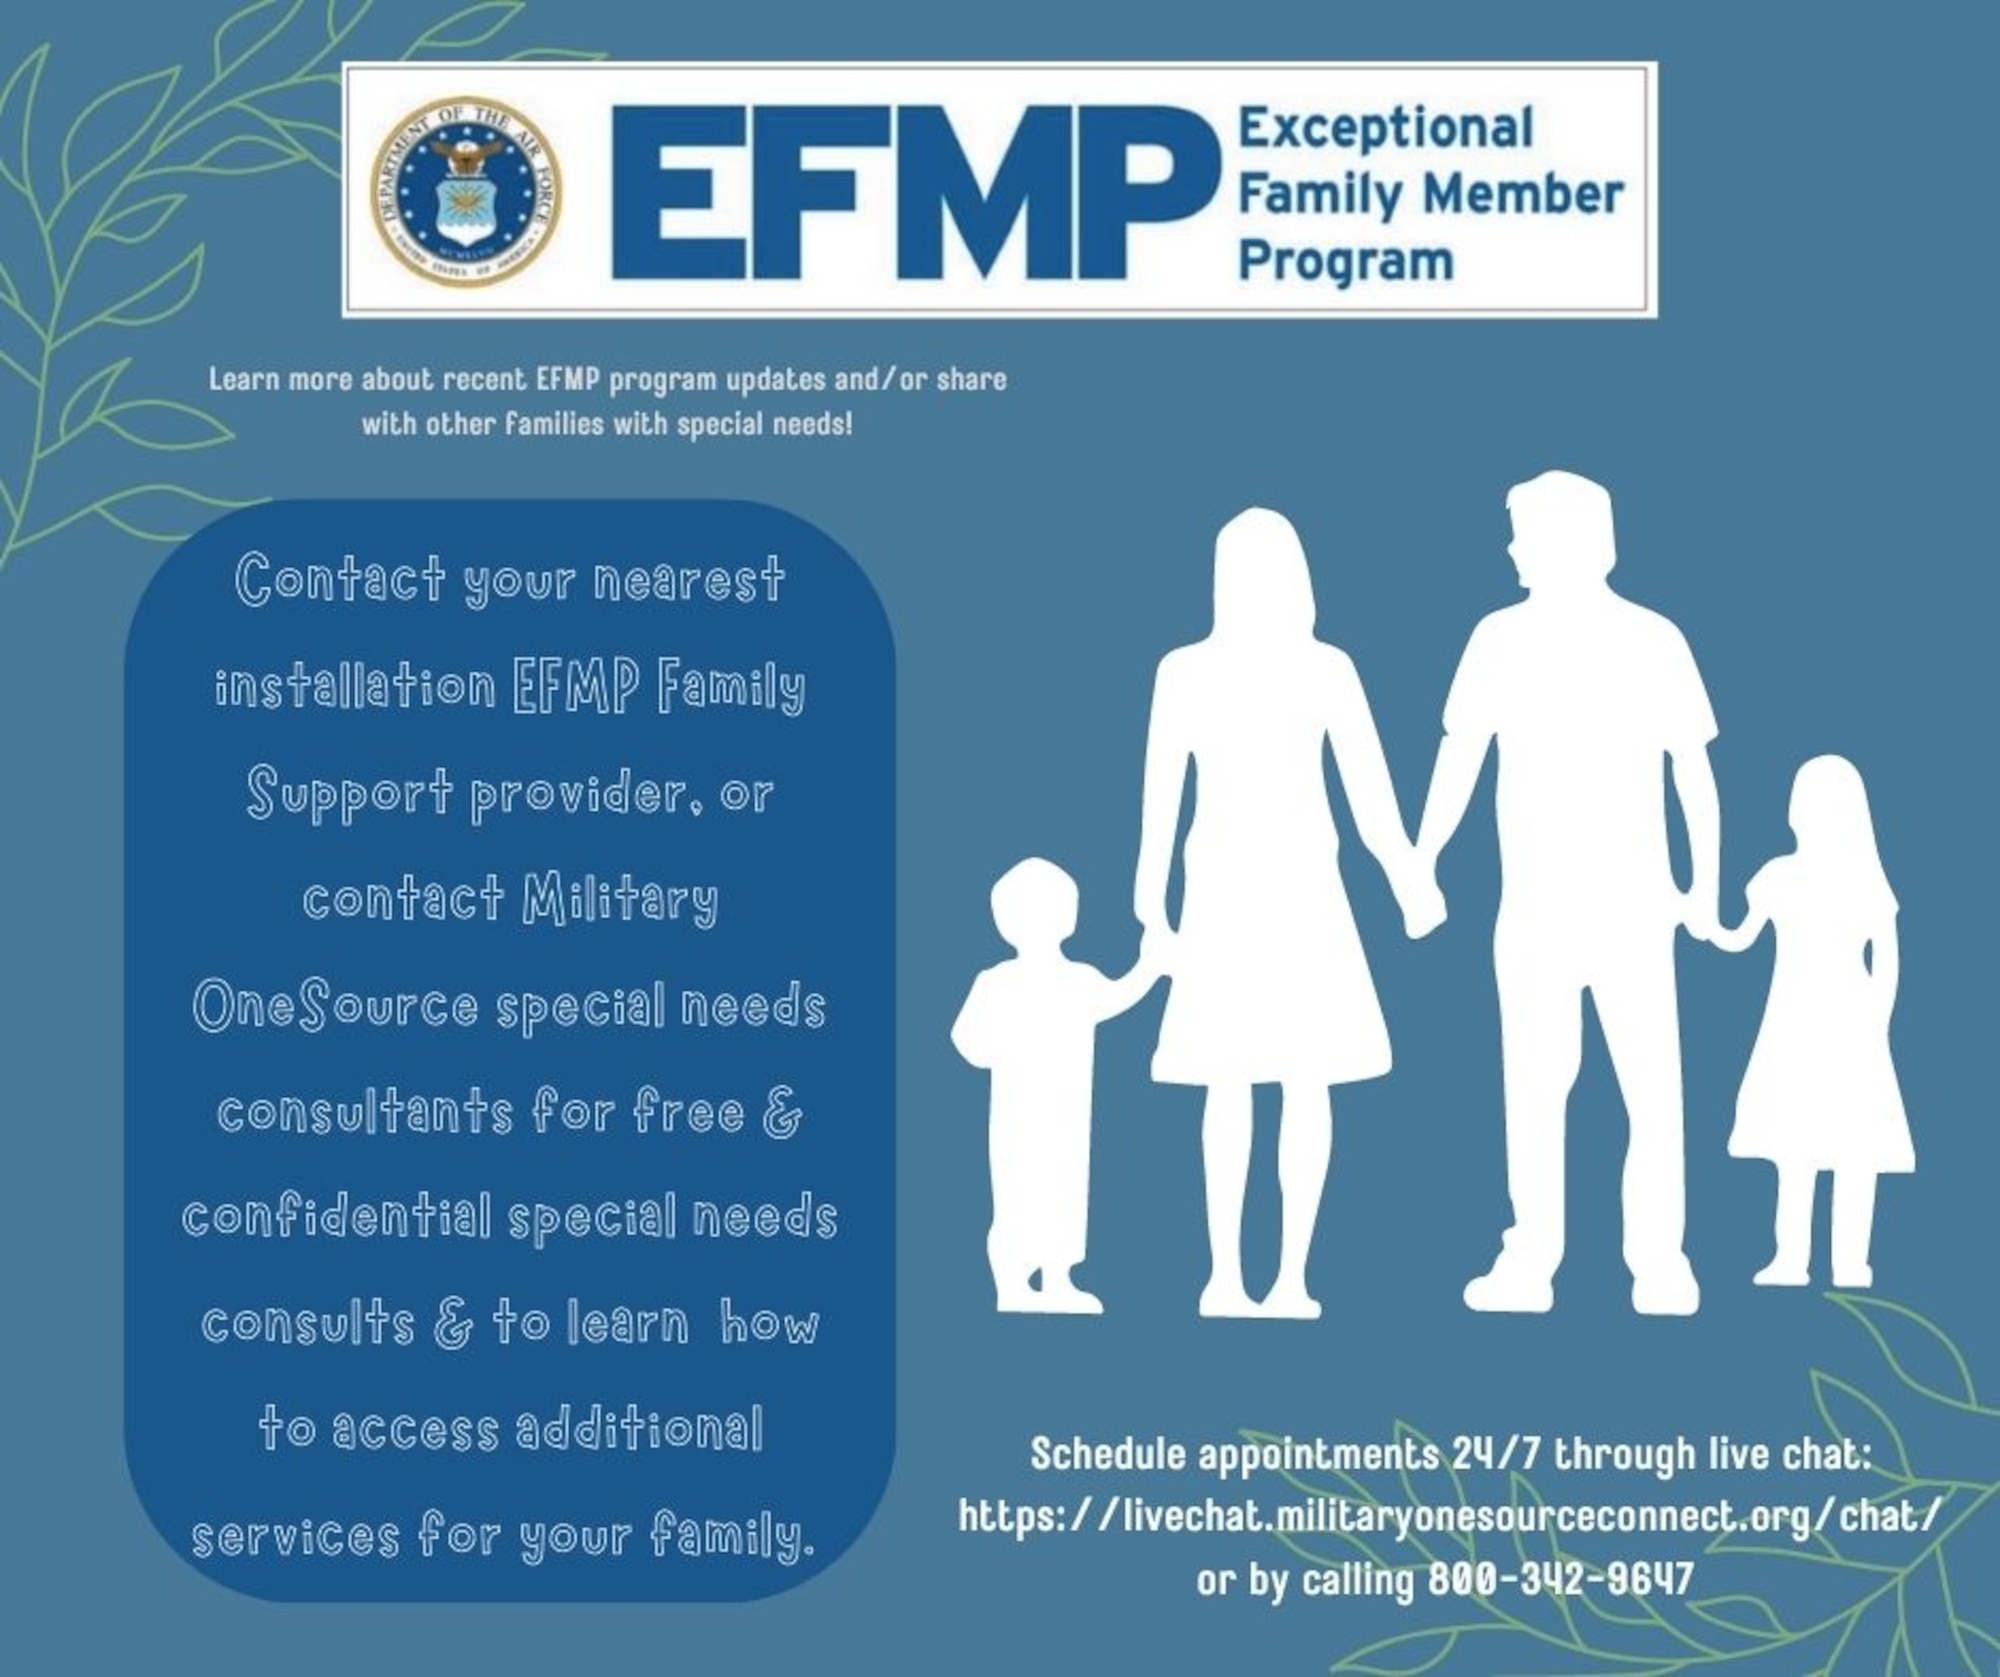 The Exceptional Family Member Program (EFMP) has undergone enterprise-wide changes to their processes since September 2021.